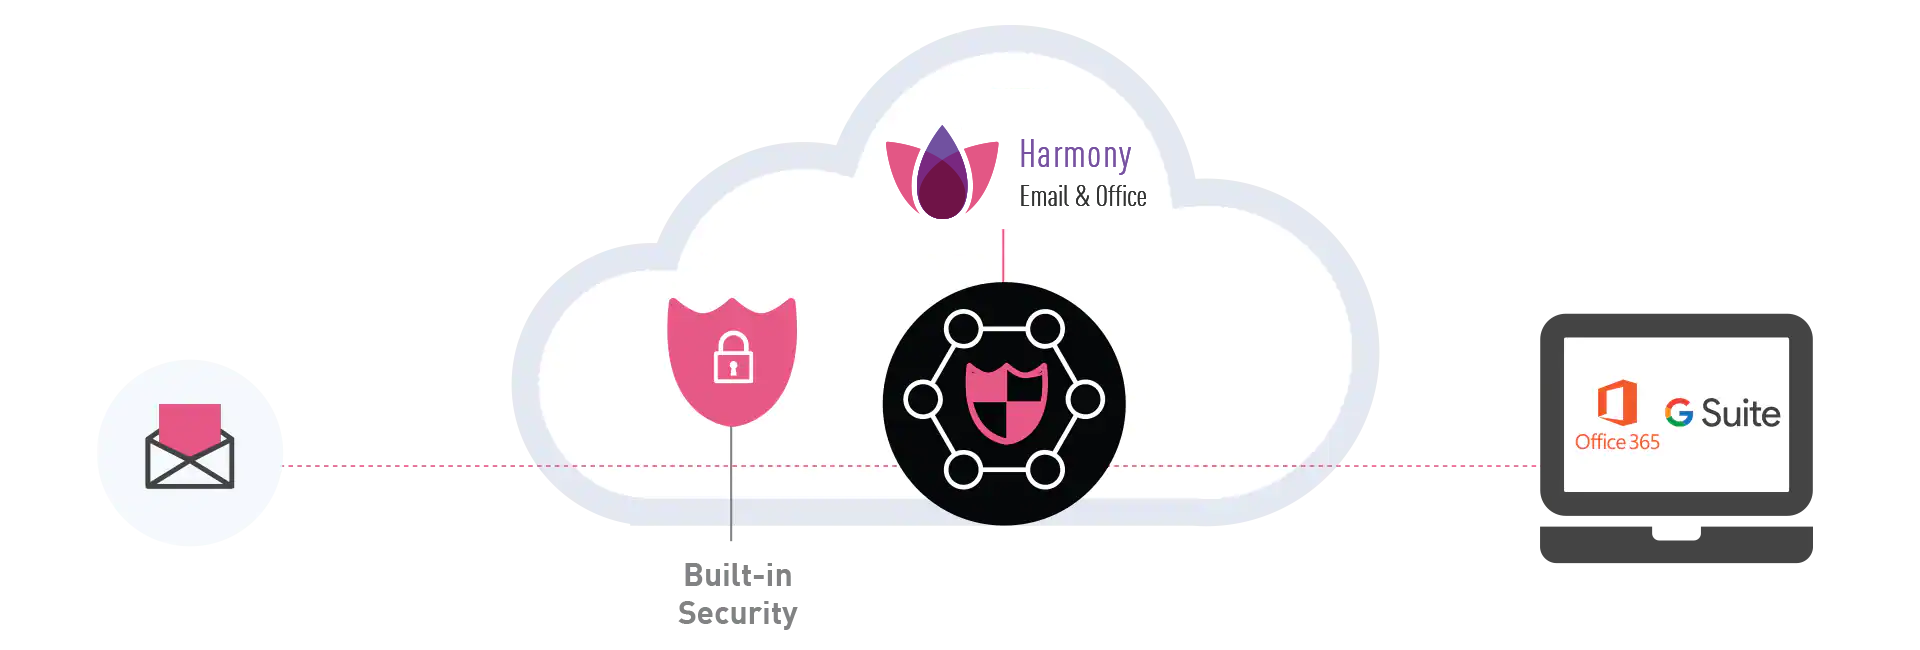 Harmony Email & Office diagram with built-in security